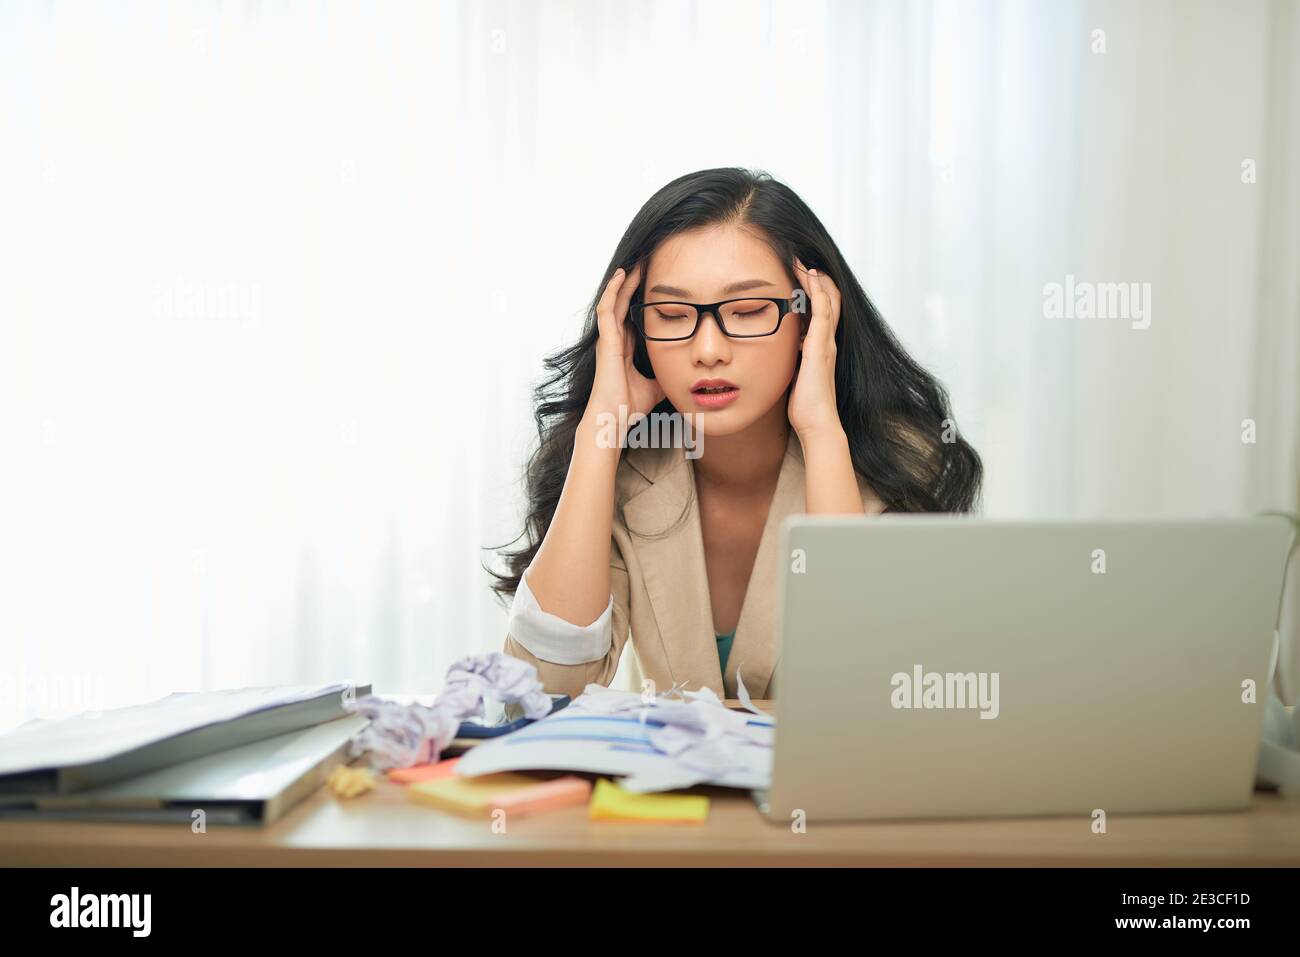 remote job, technology and people concept - stressed young woman with laptop computer and papers working at home office Stock Photo